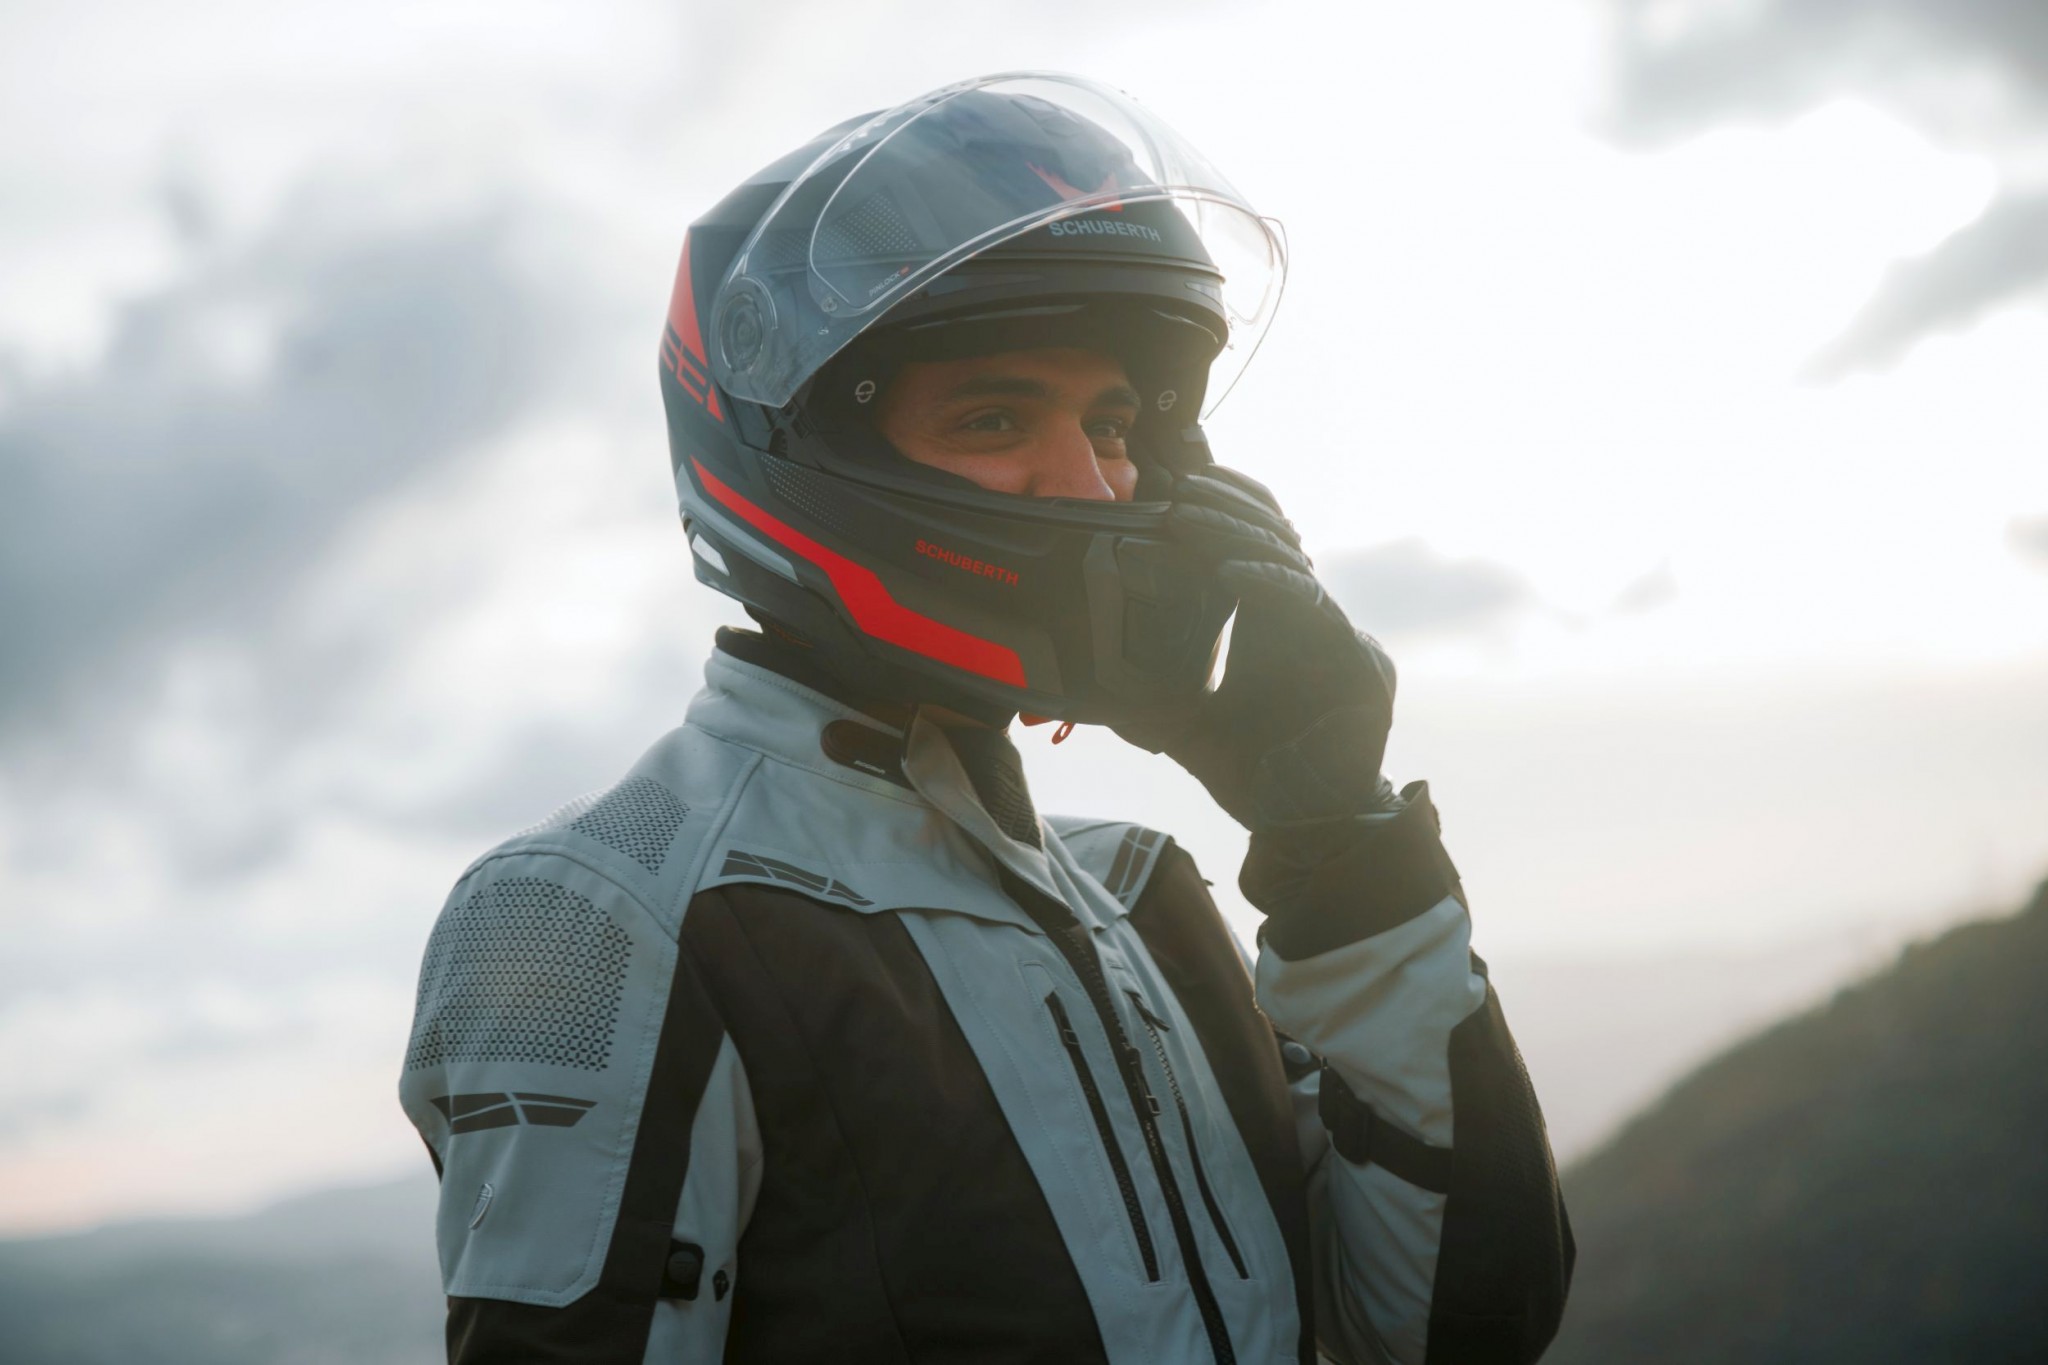 Schuberth S3 sport touring helmet in the test - Image 9